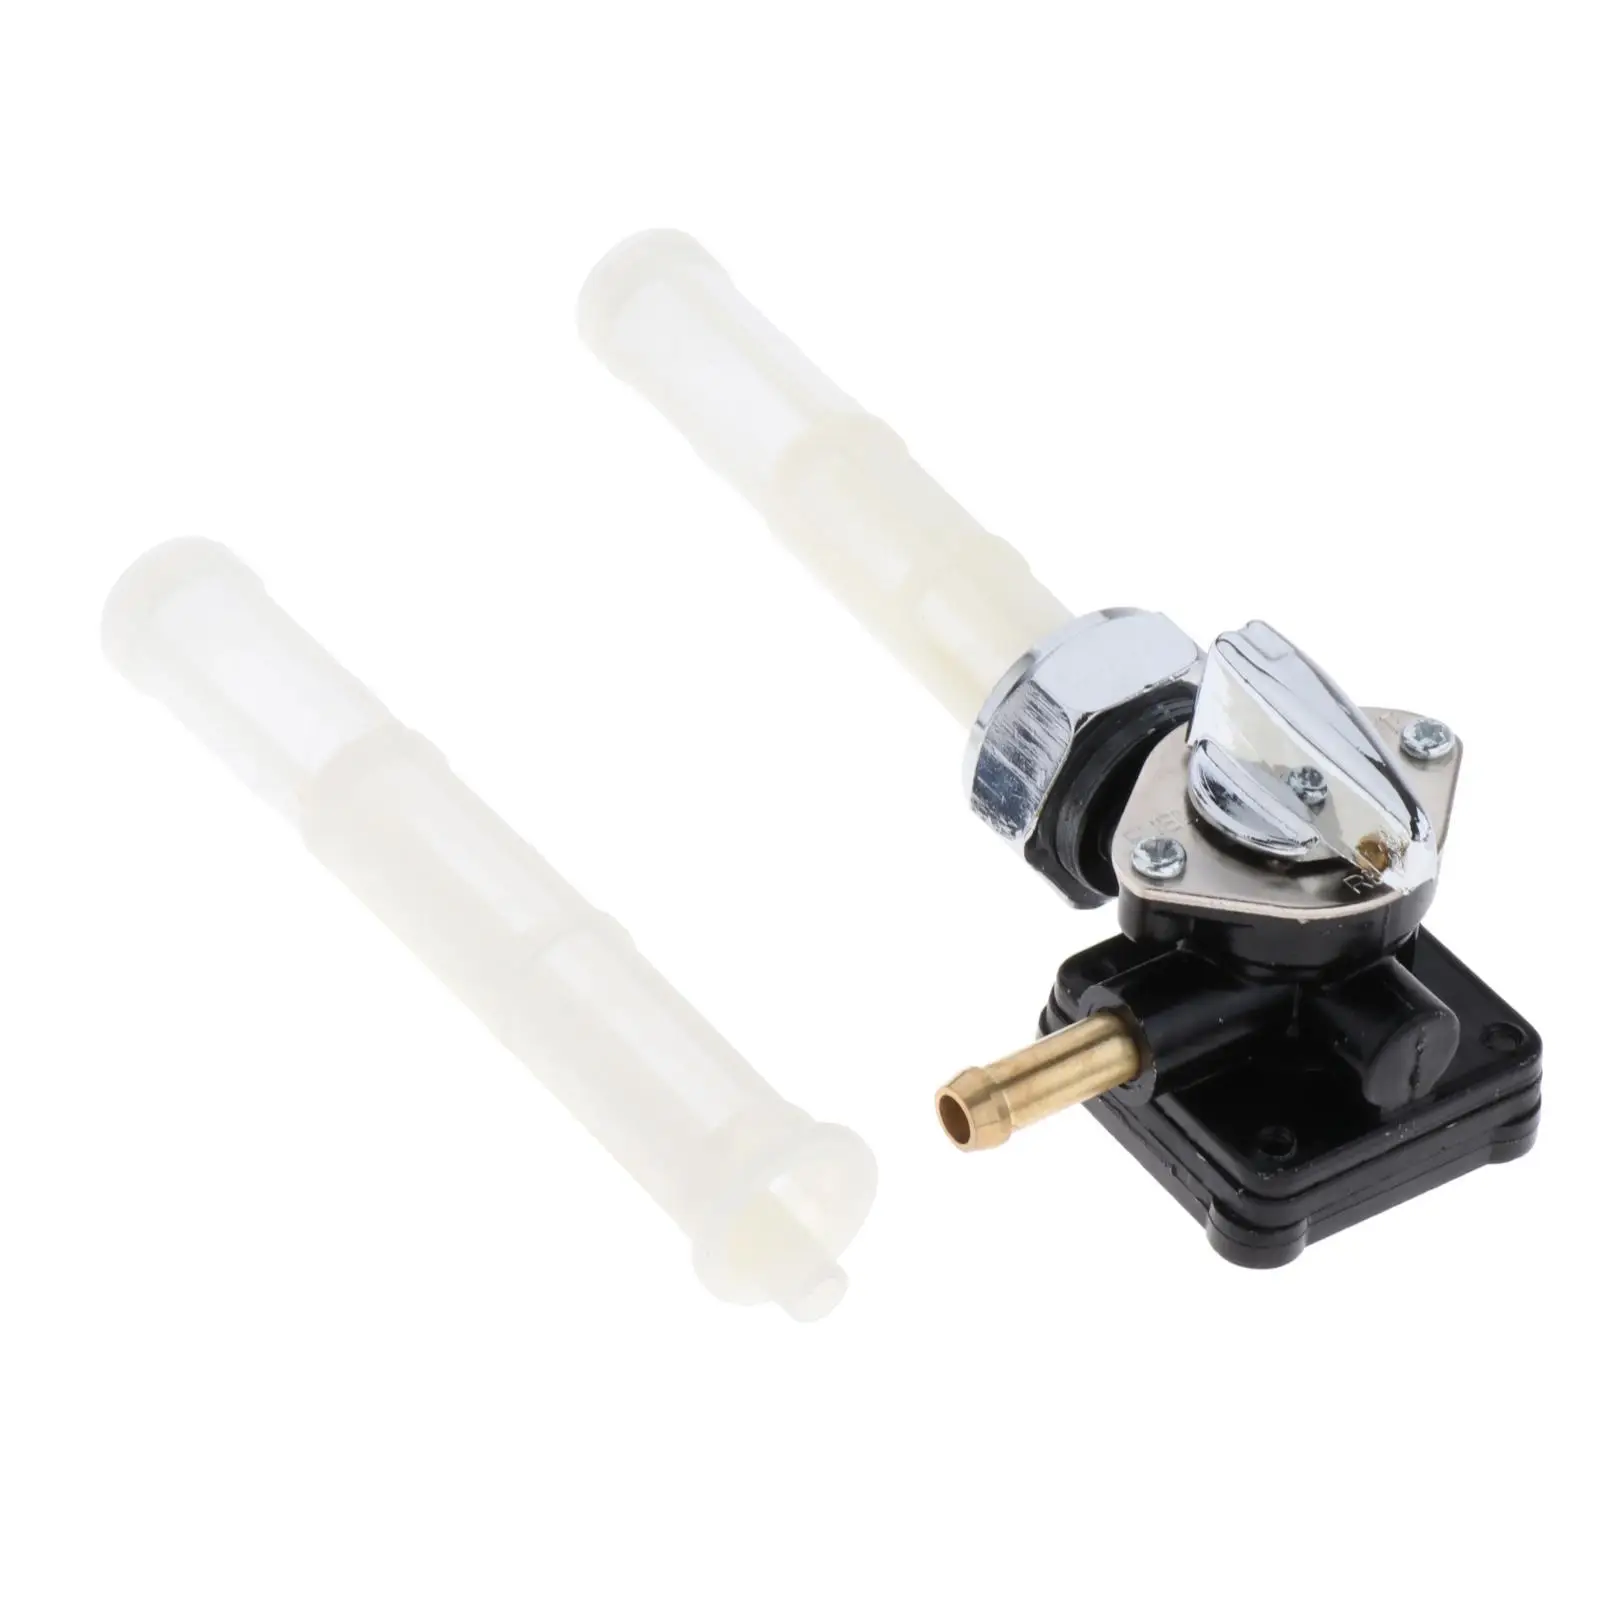 Motorcycle Fuel Tank Switch Valve Petcock with Filter Mesh Strong 61338-94D Gas Shut Off Switch for Flst Replacement Parts